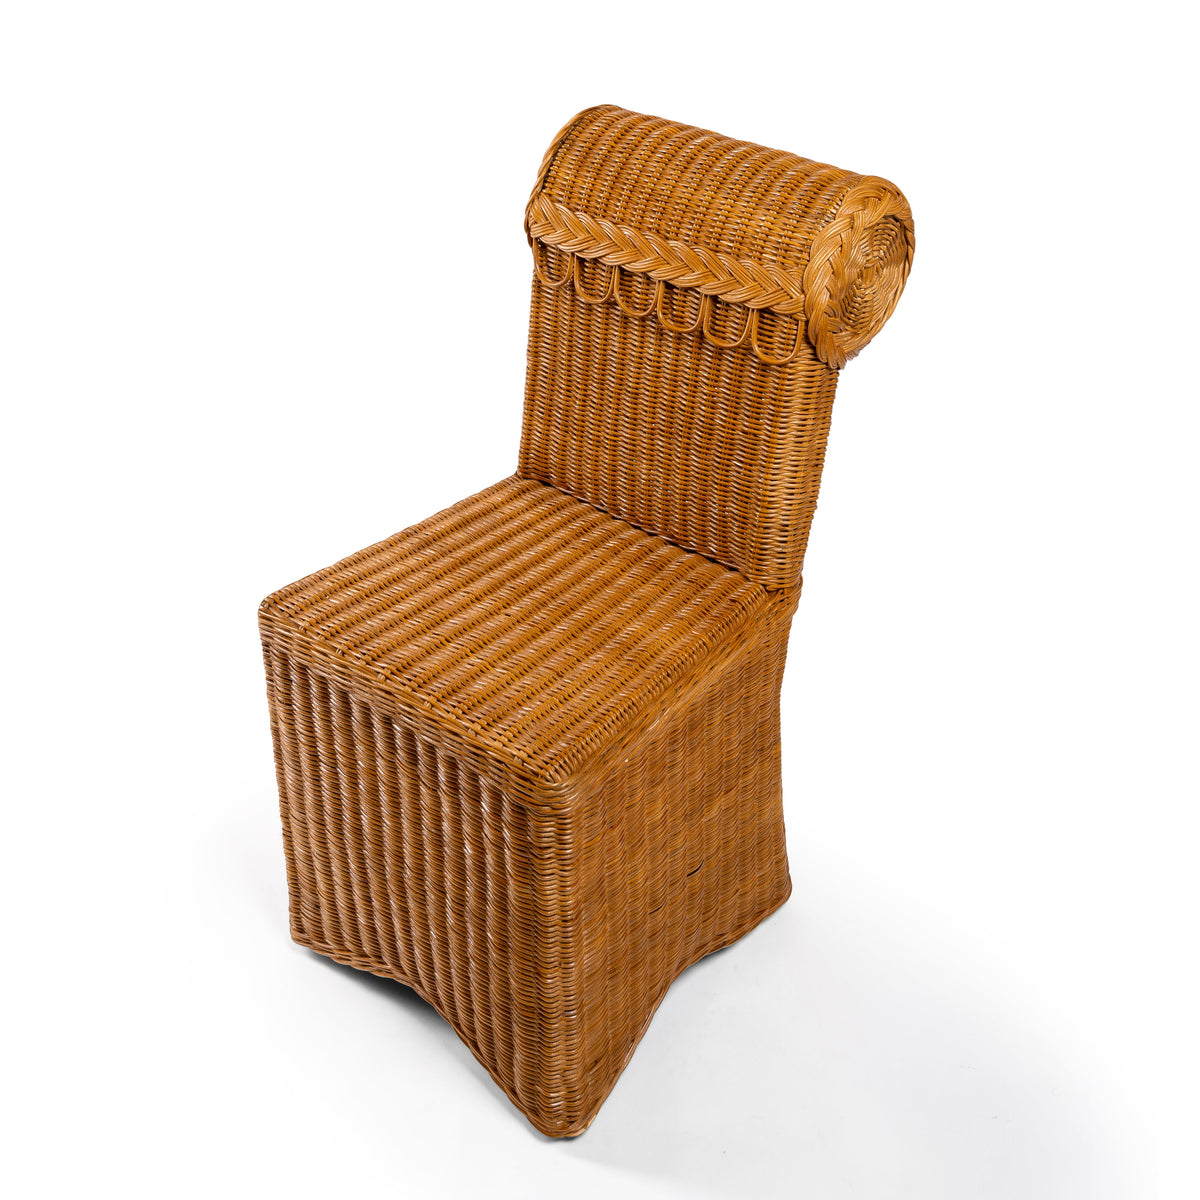 Top Photo of Sharland-England's Letty slipper chair, hand-crafted from 100% natural rattan and featuring undulating lines and feminine silhouette